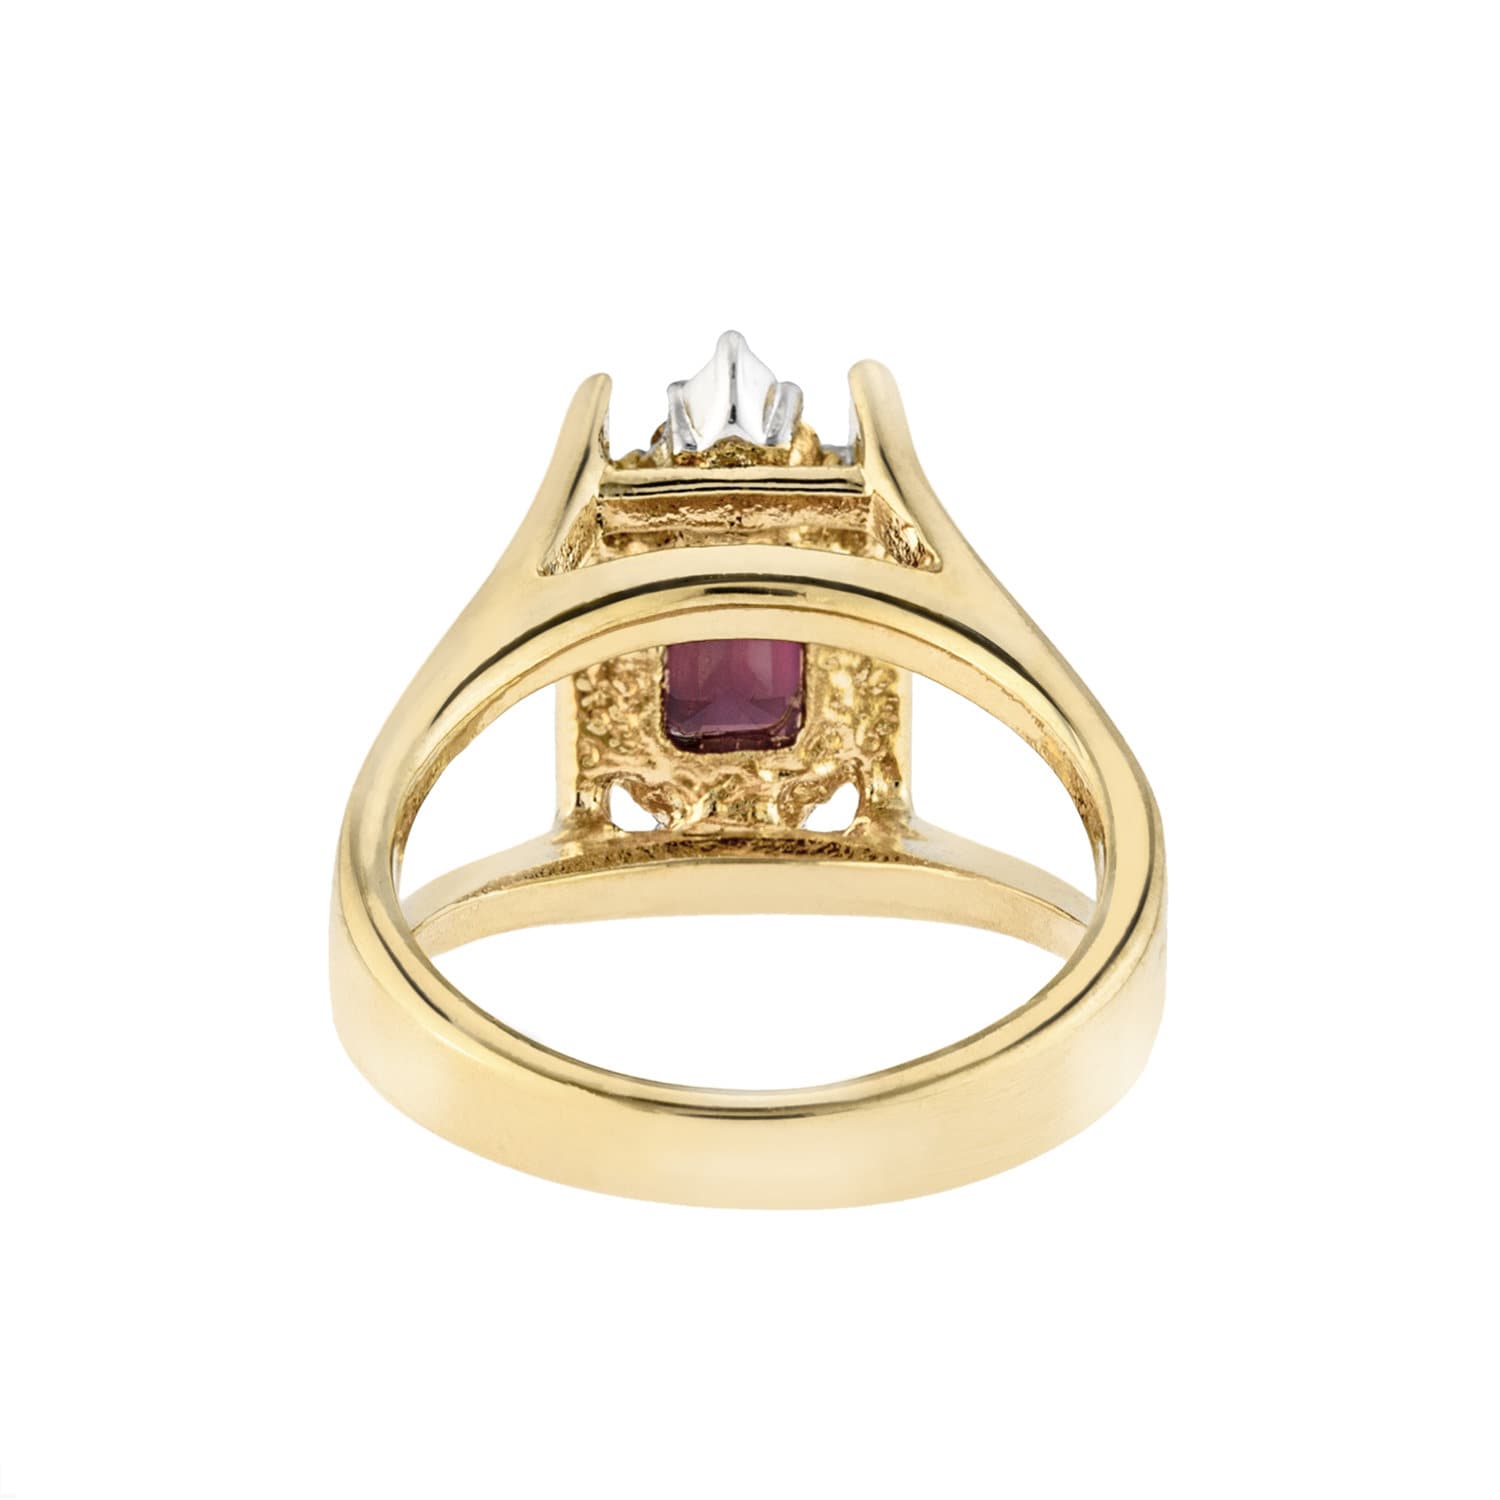 Women's Vintage Ring Amethyst Ring Antique 18k Gold Austrian Crystals February Birthstone Womans Jewelry #R1747